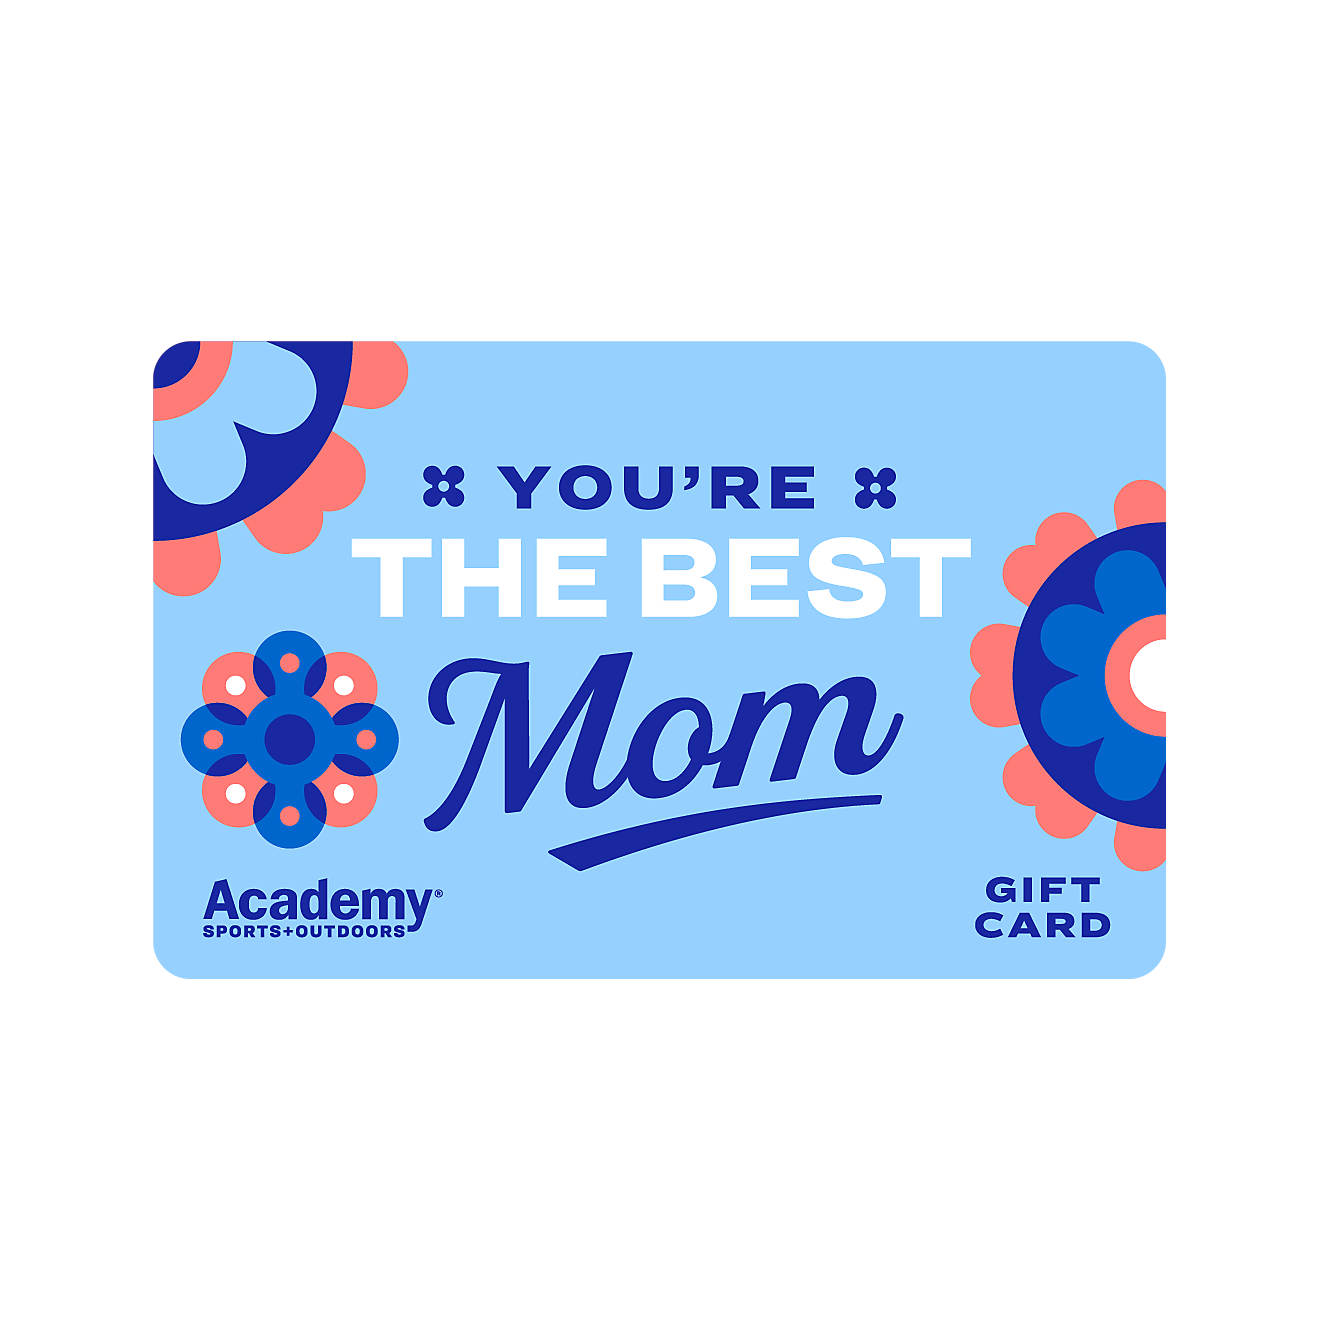 eGift Card - You're the Best, Mom Academy Gift Card                                                                              image